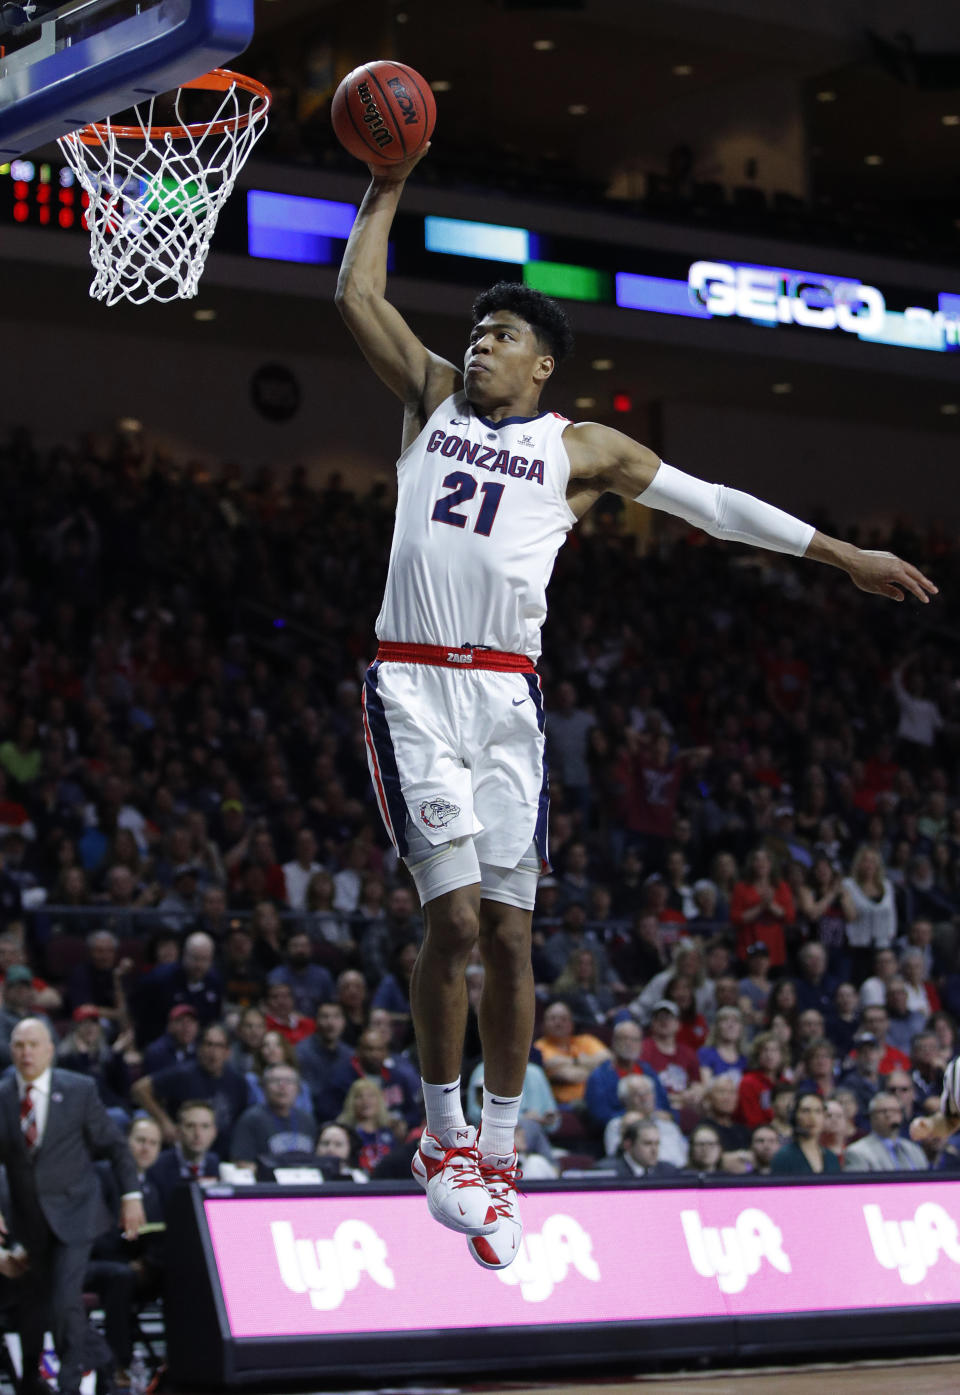 Gonzaga's Rui Hachimura dunks against St. Mary's during the first half of an NCAA college basketball game for the West Coast Conference men's tournament title, Tuesday, March 12, 2019, in Las Vegas. (AP Photo/John Locher)